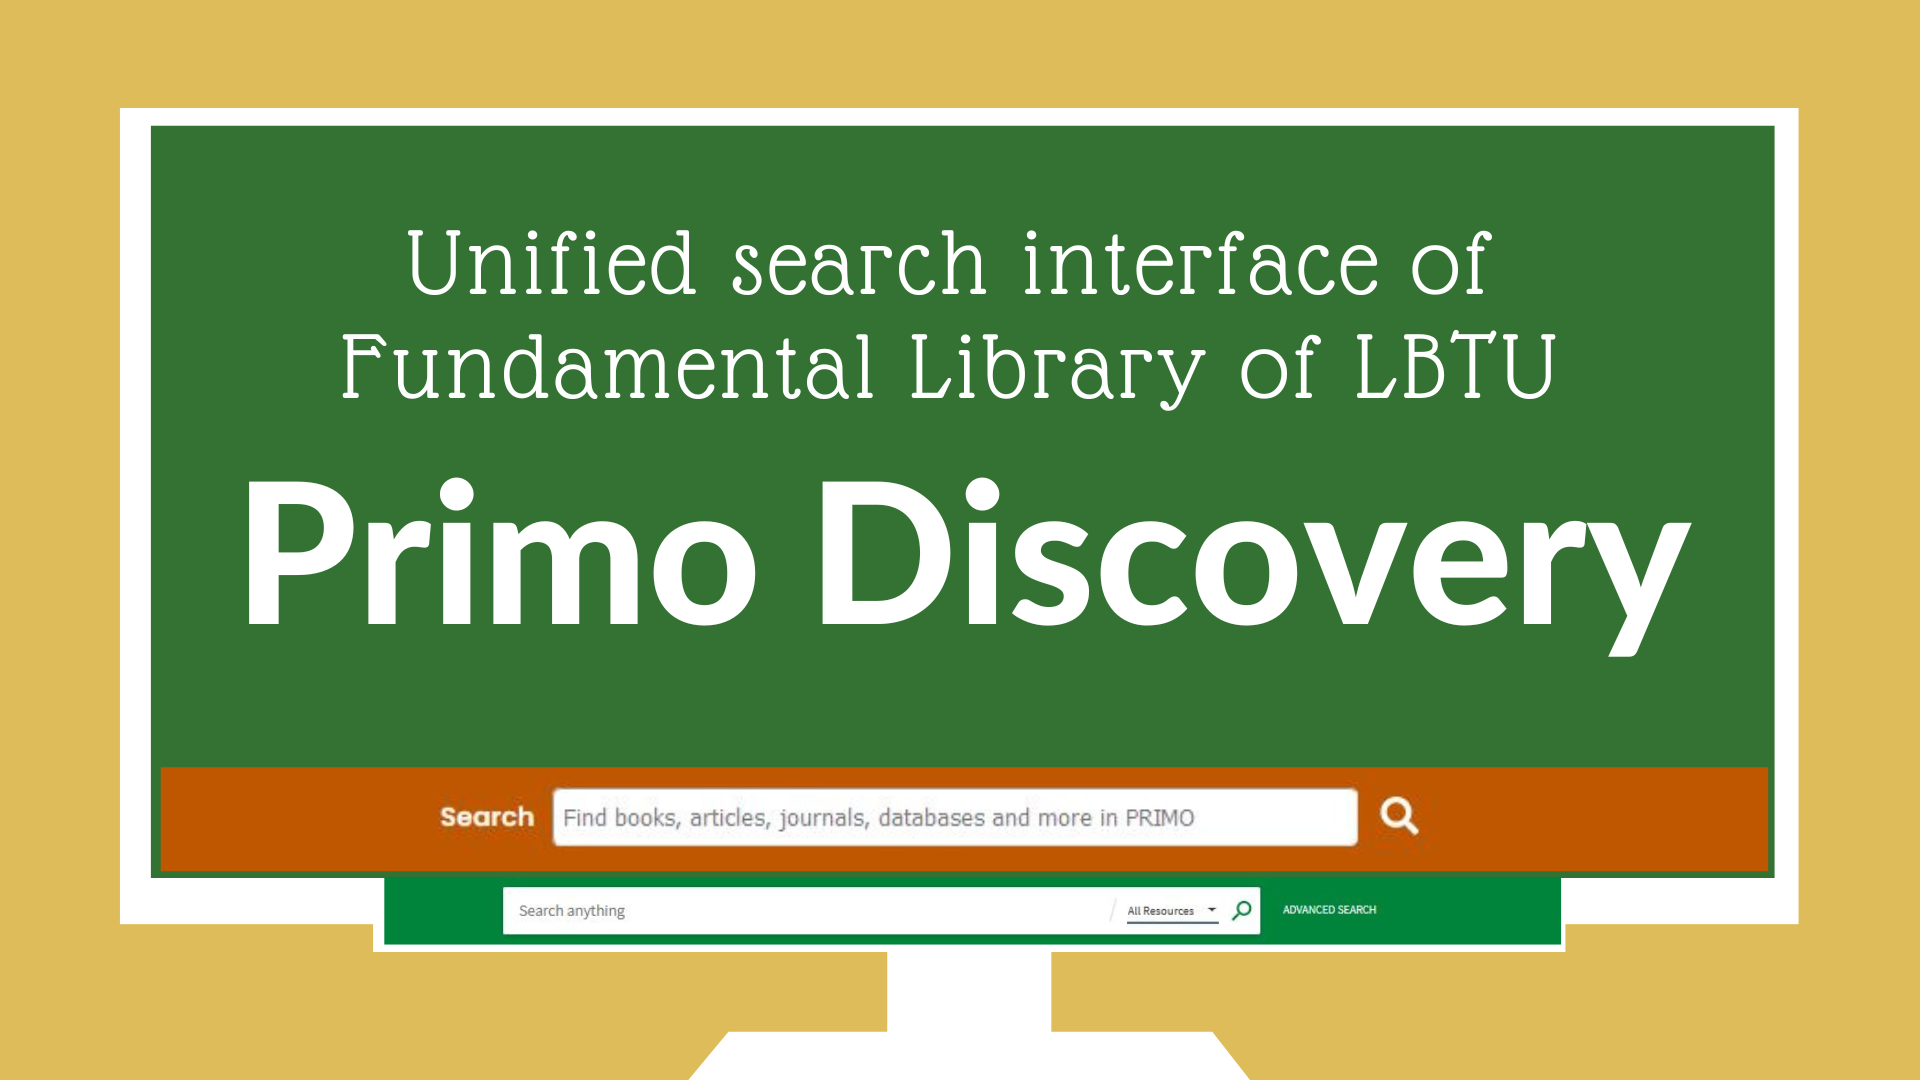 Unified search interface of Fundamental Library of LBTU (PRIMO DISCOVERY) 